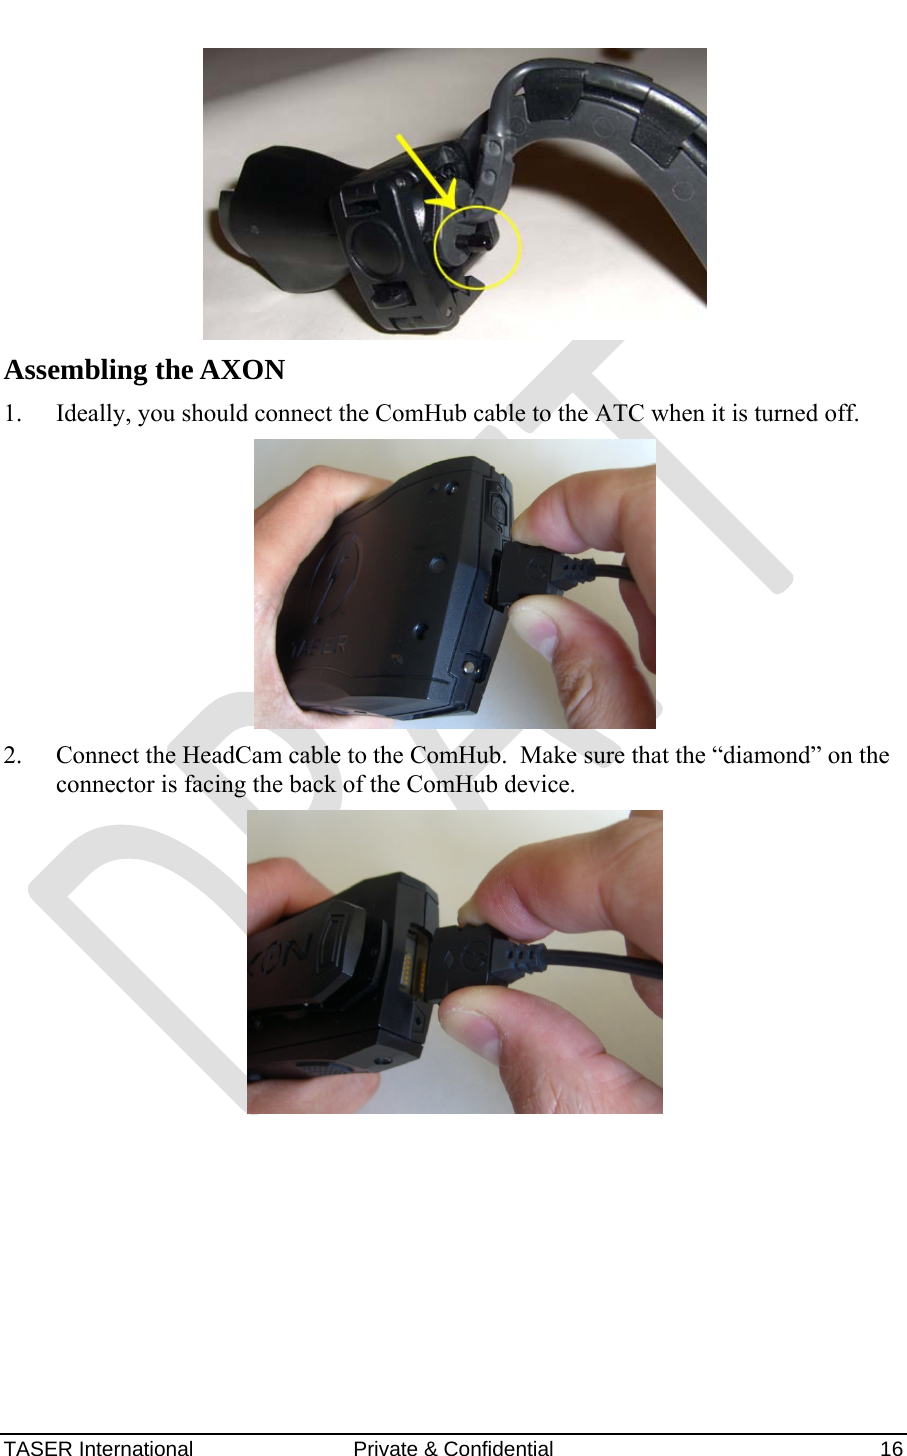 AXON™  4 Jan 2010 TASER International  Private &amp; Confidential    16  Assembling the AXON 1. Ideally, you should connect the ComHub cable to the ATC when it is turned off.  2. Connect the HeadCam cable to the ComHub.  Make sure that the “diamond” on the connector is facing the back of the ComHub device.    